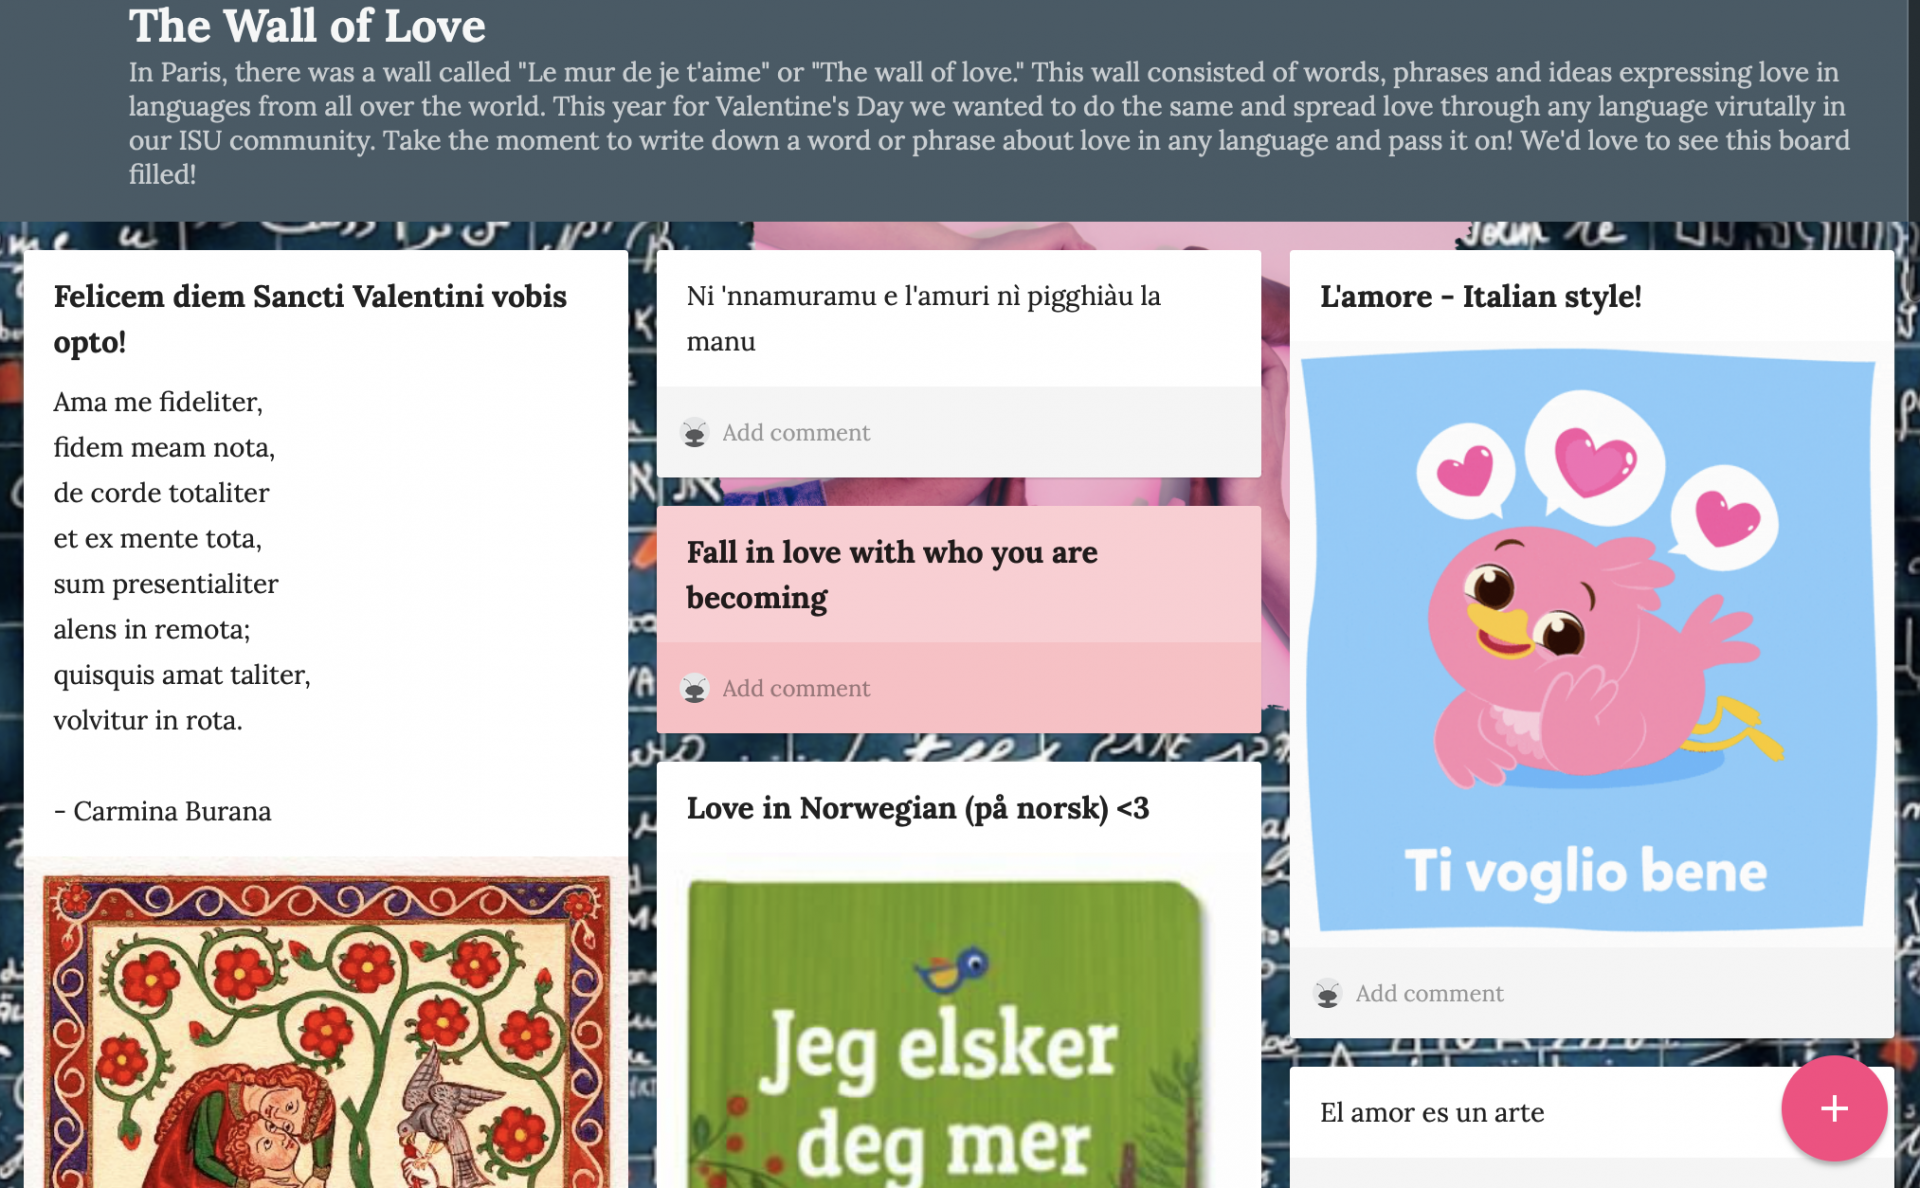 A screenshot of this year's online "Wall of Love," showing the words "I love you" in many different languages.